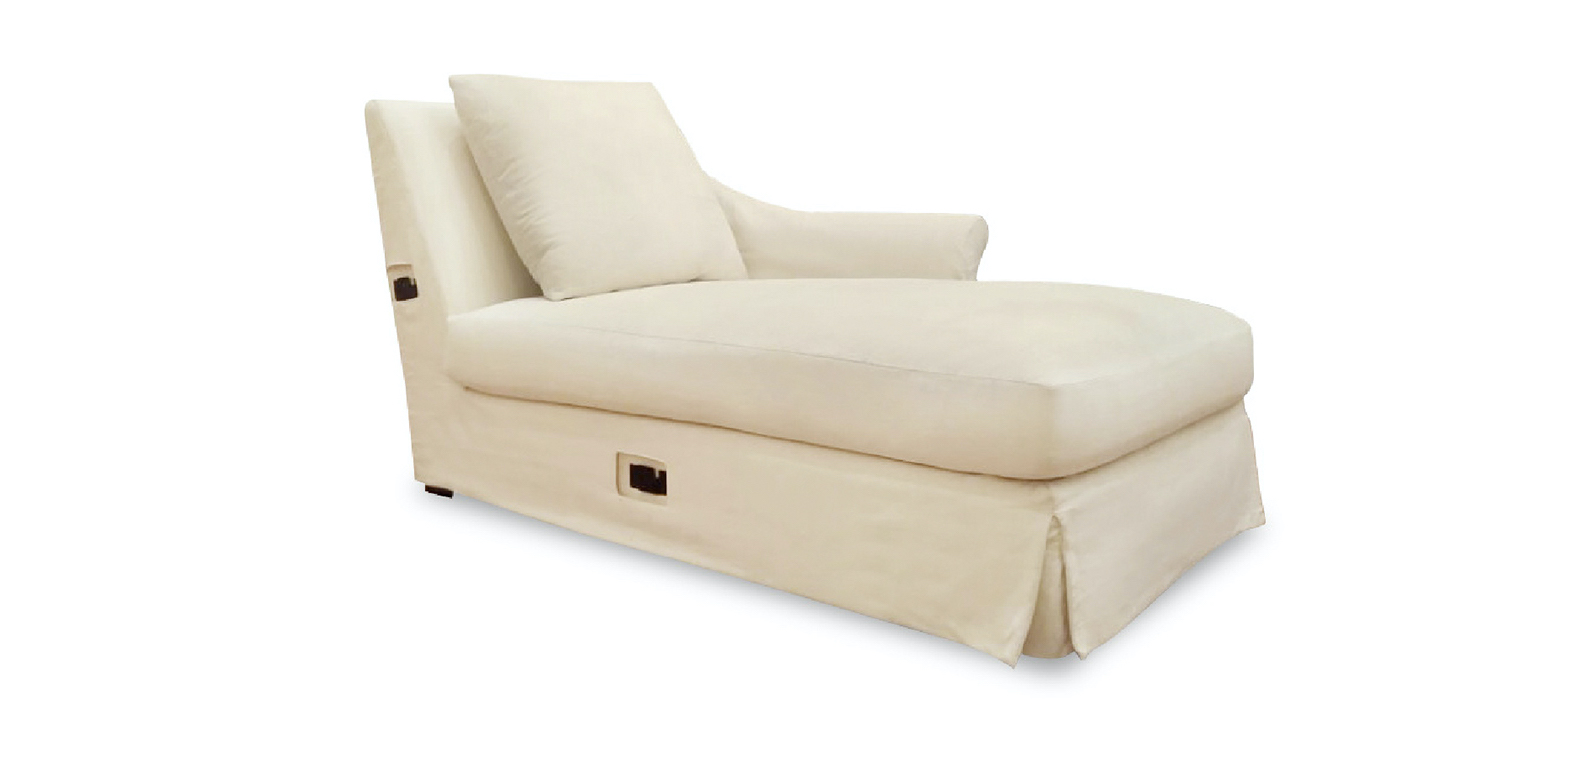 ANTIVES CHAISE LONGUE WITH LEFT ARM